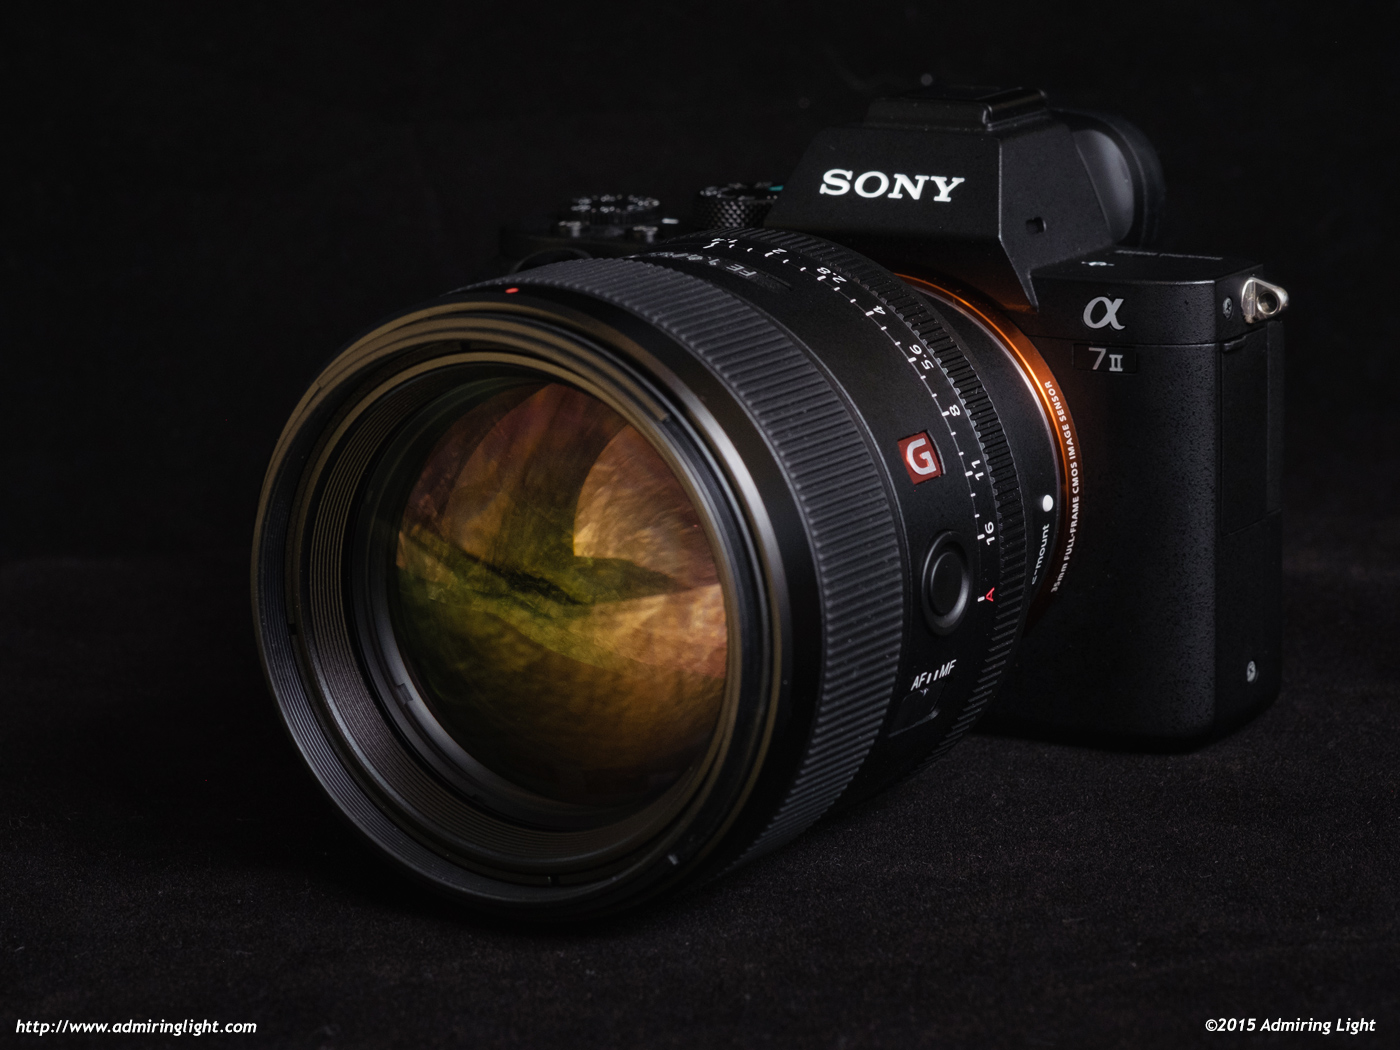 The Sony FE 85mm f/1.4 GM on the Sony A7 II